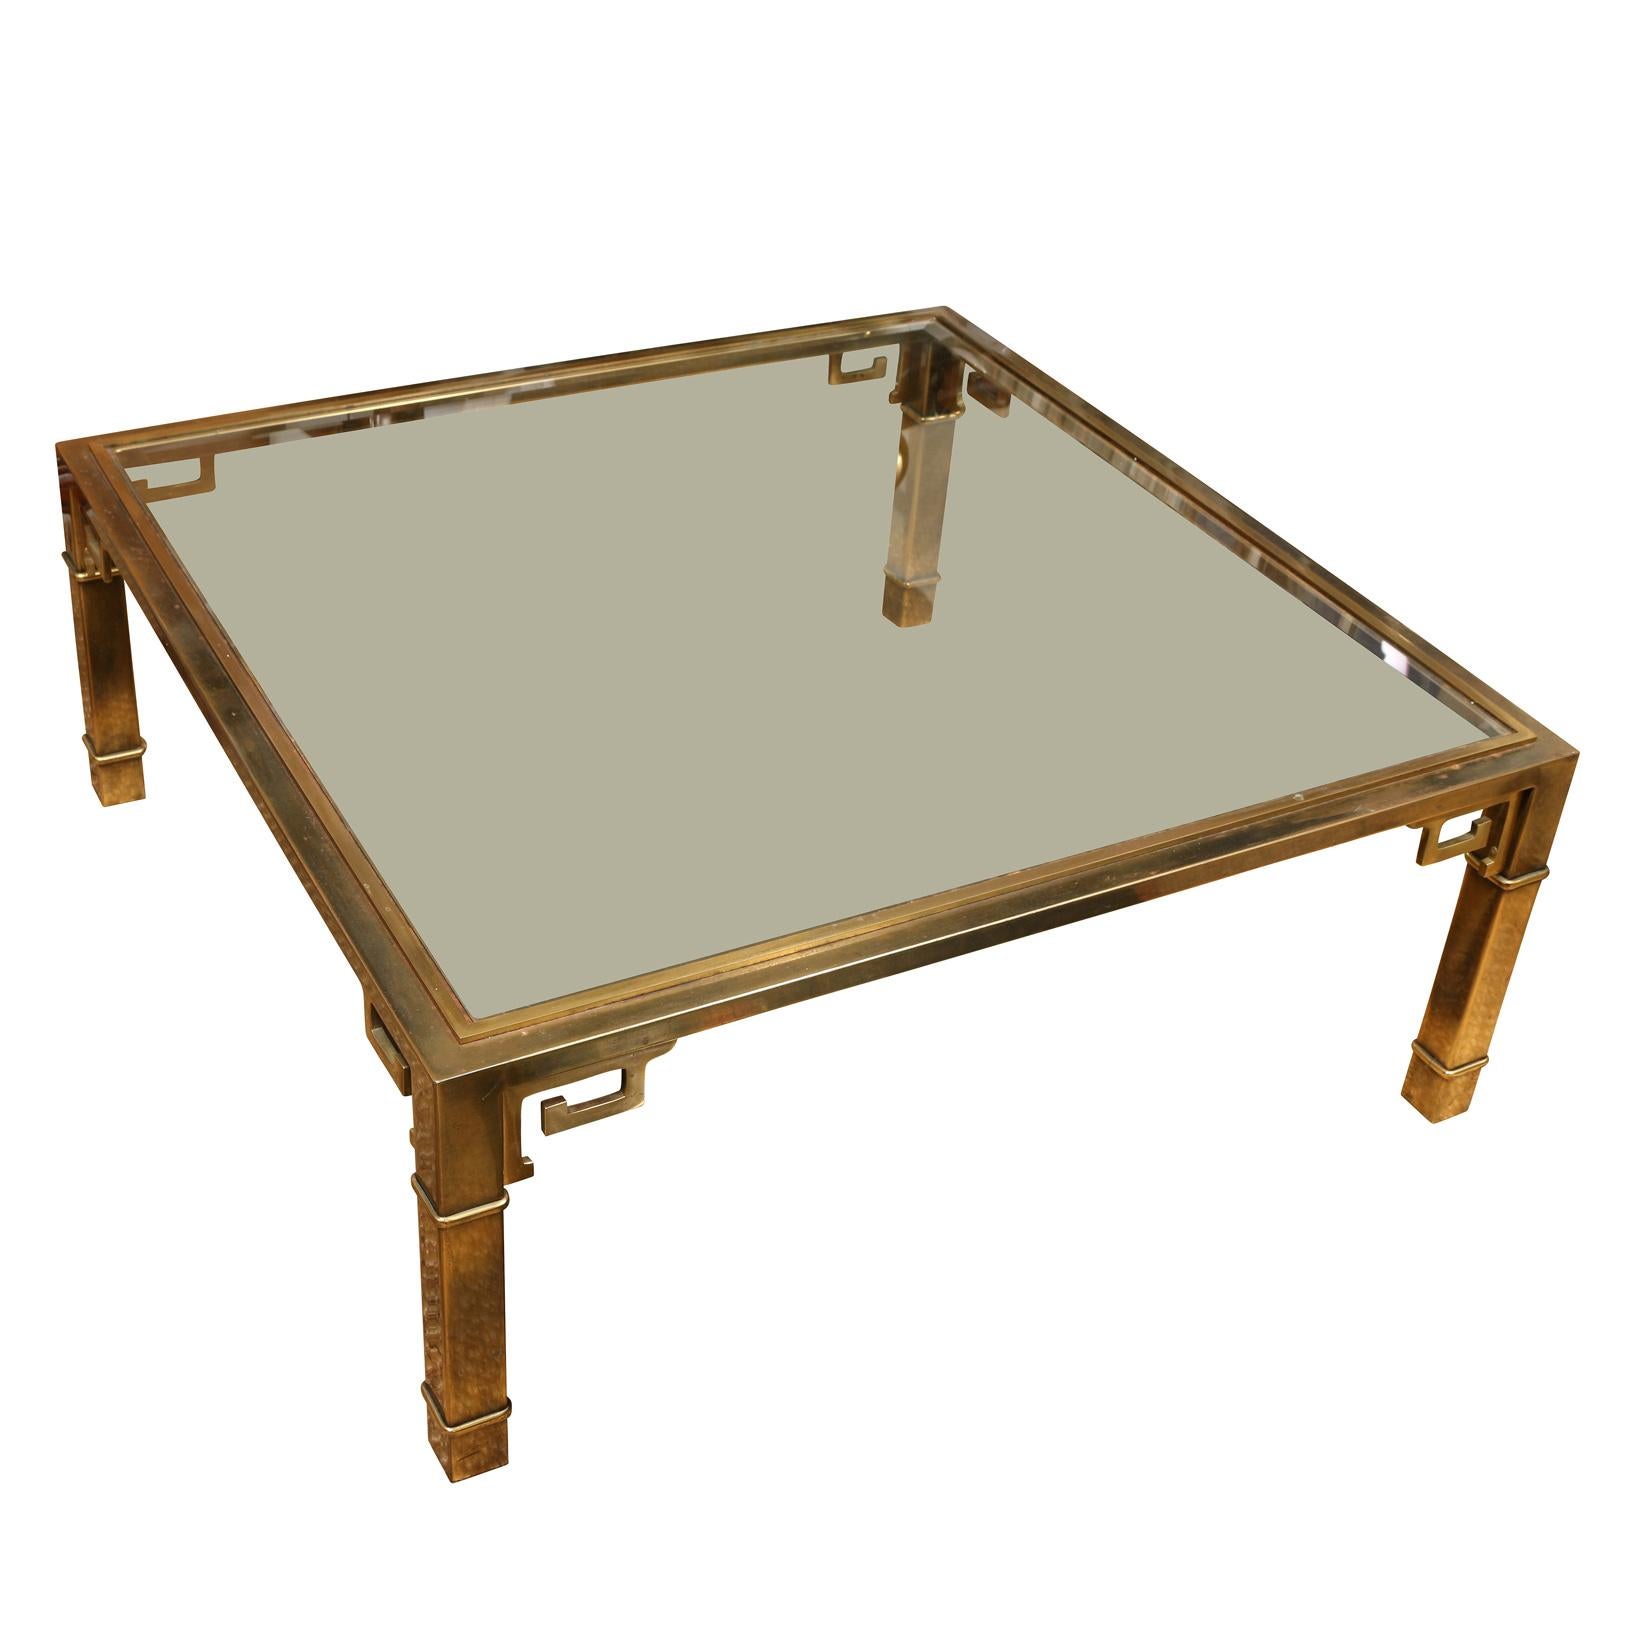 Circa 1970 Mastercraft square Asian style coffee table of bronze patinated brass and beveled glass top with fretwork design to apron.